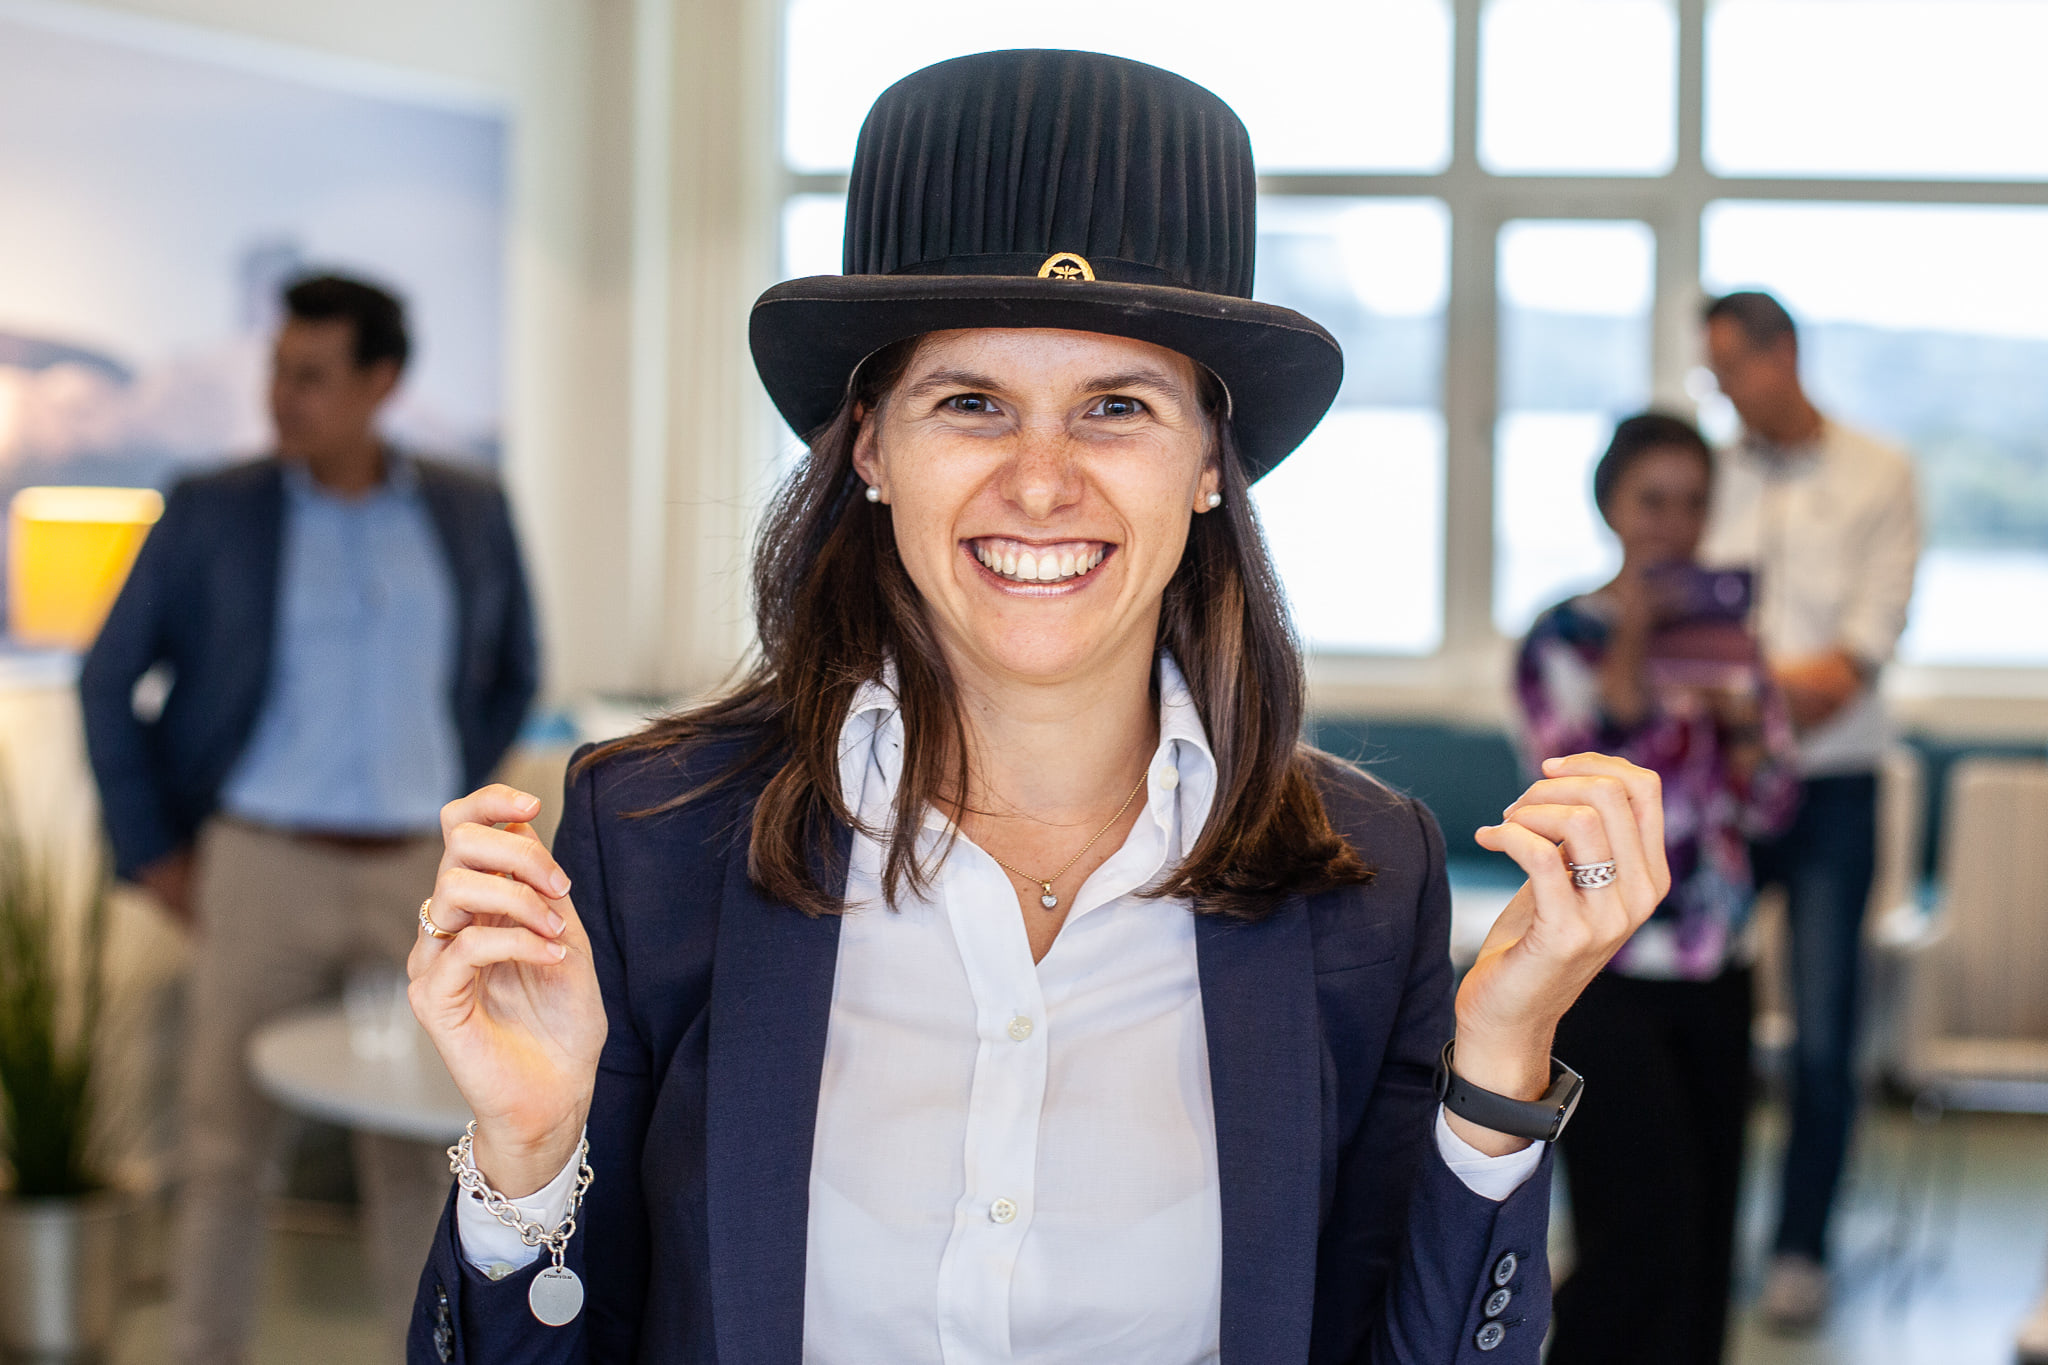 Smiling female with doctoral hat